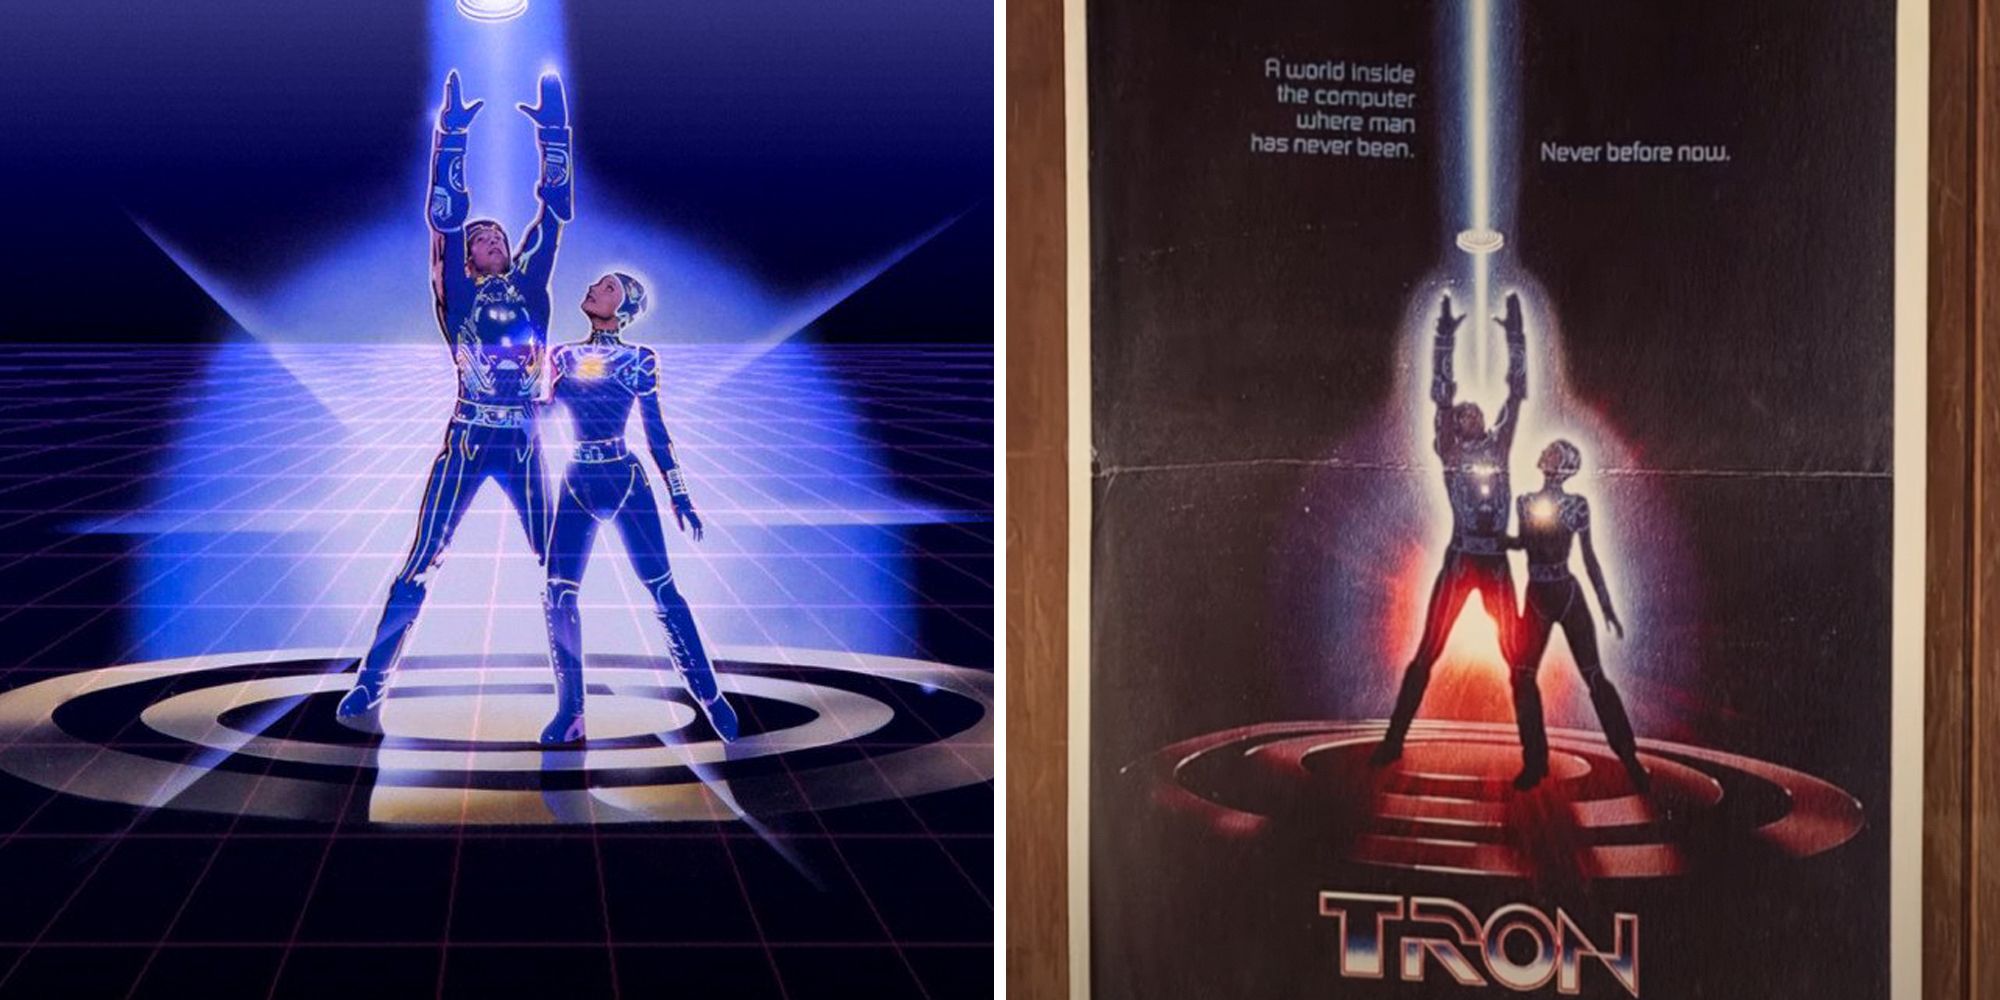 Marvel's Guardians Of The Galaxy. Split image. Tron movie on the left and Tron poster on the right.